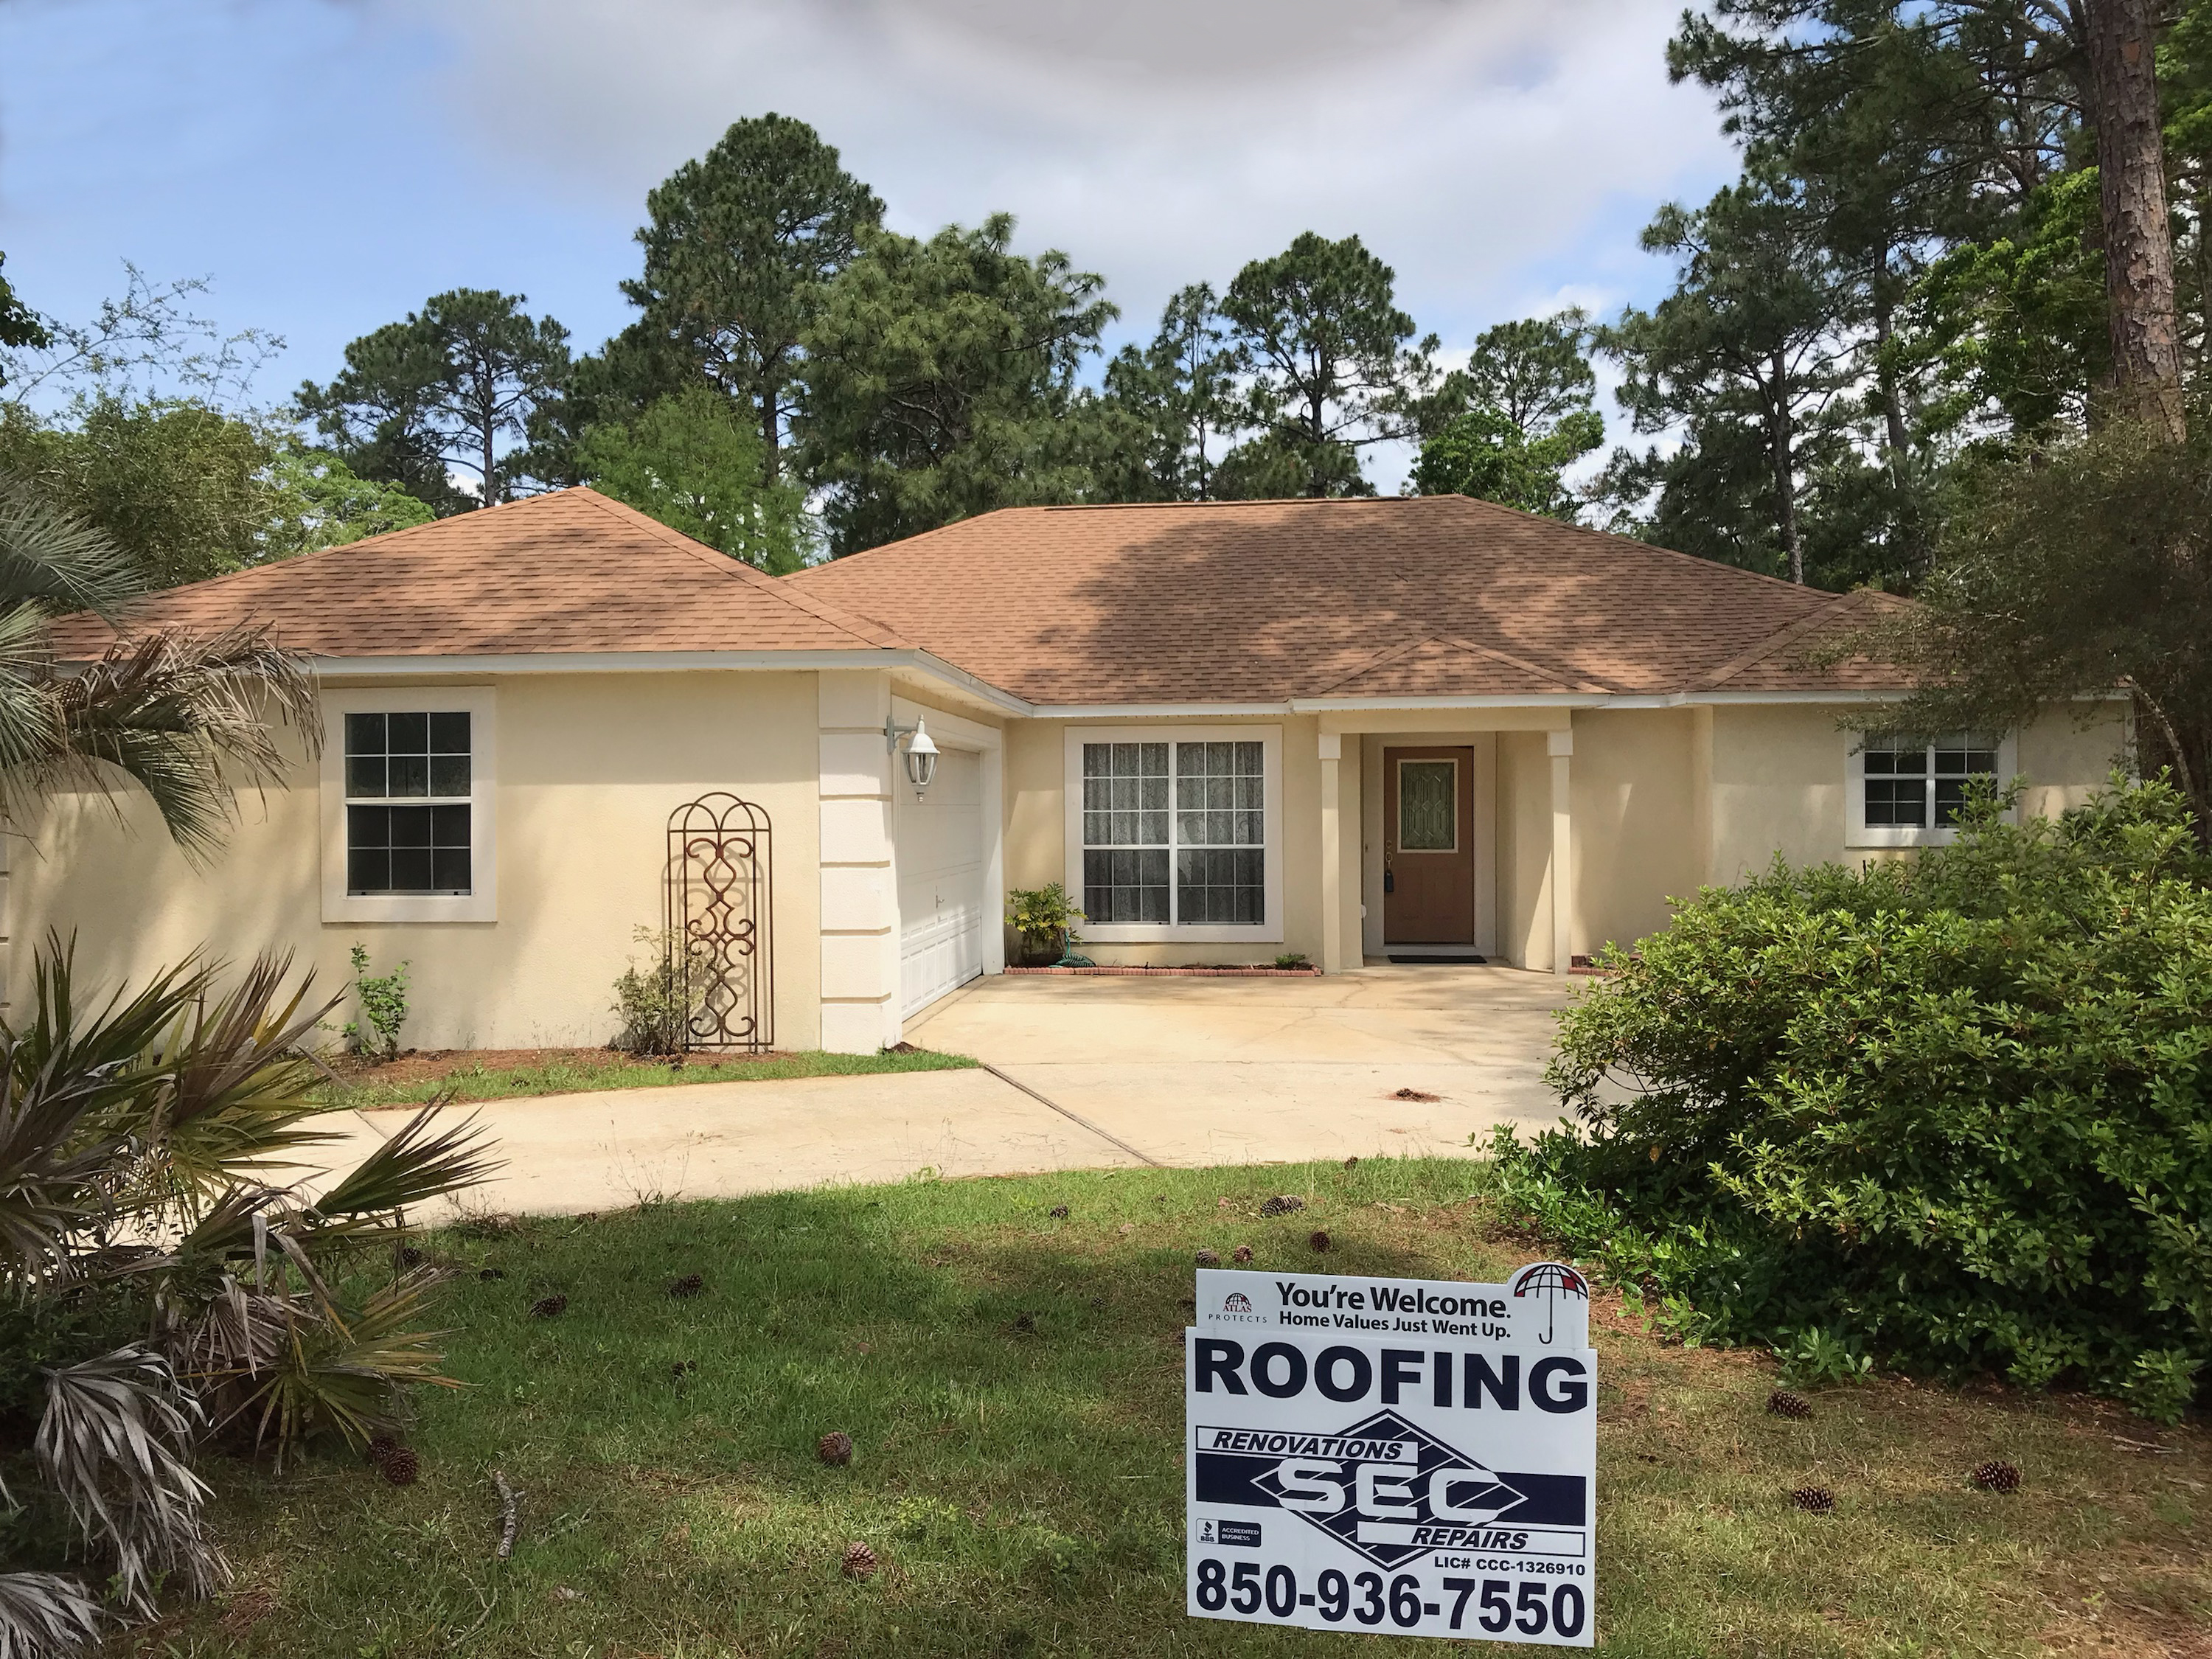 tallahassee roofing company